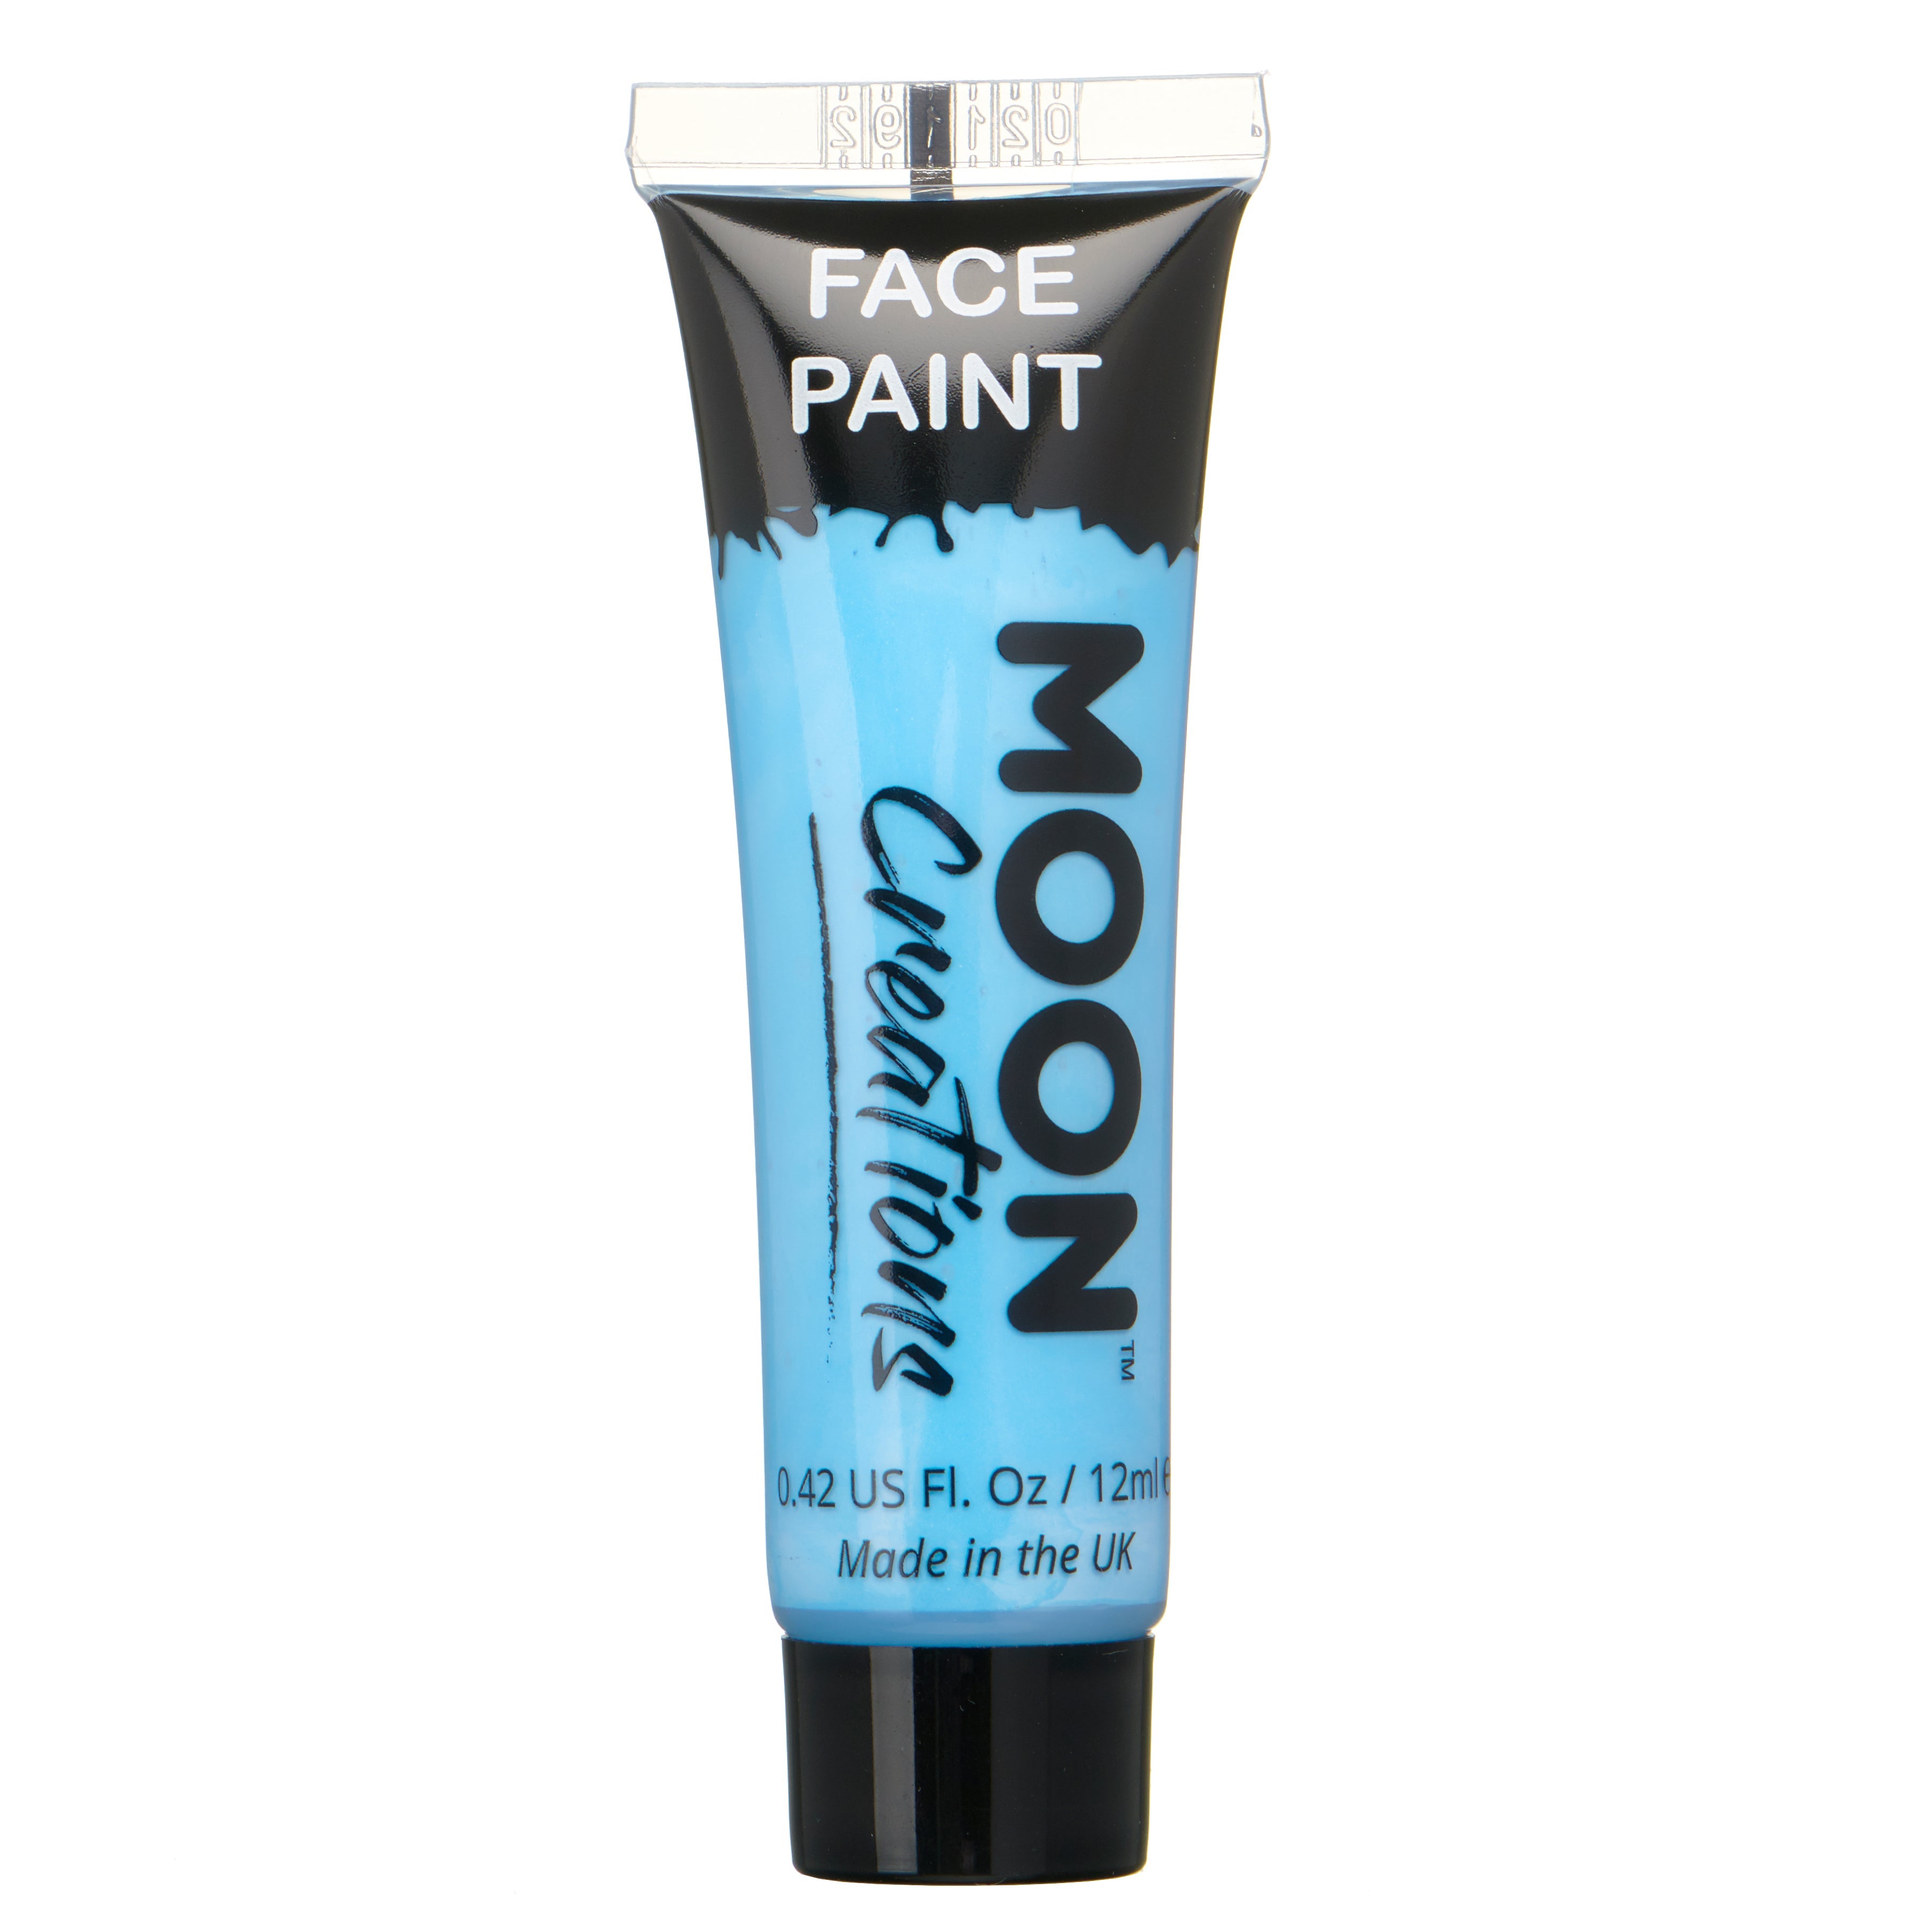 Light Blue - Face & Body Paint Makeup, 12mL. Cosmetically certified, FDA & Health Canada compliant, cruelty free and vegan.